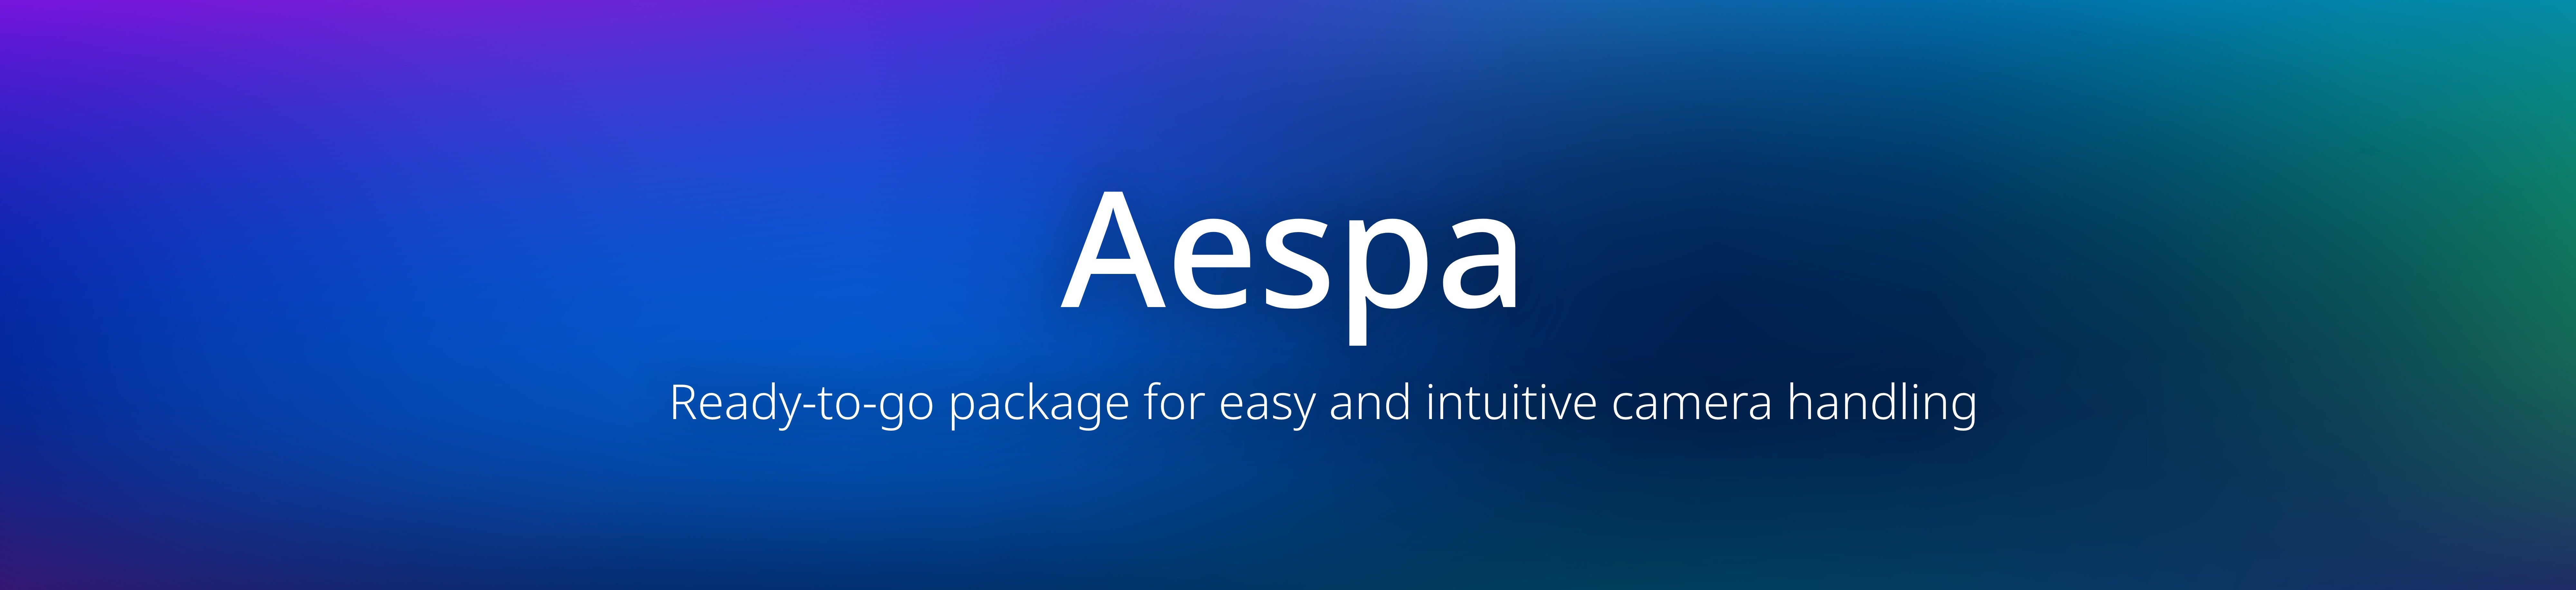 Aespa. Ready-to-go package for easy and intuitive camera handling